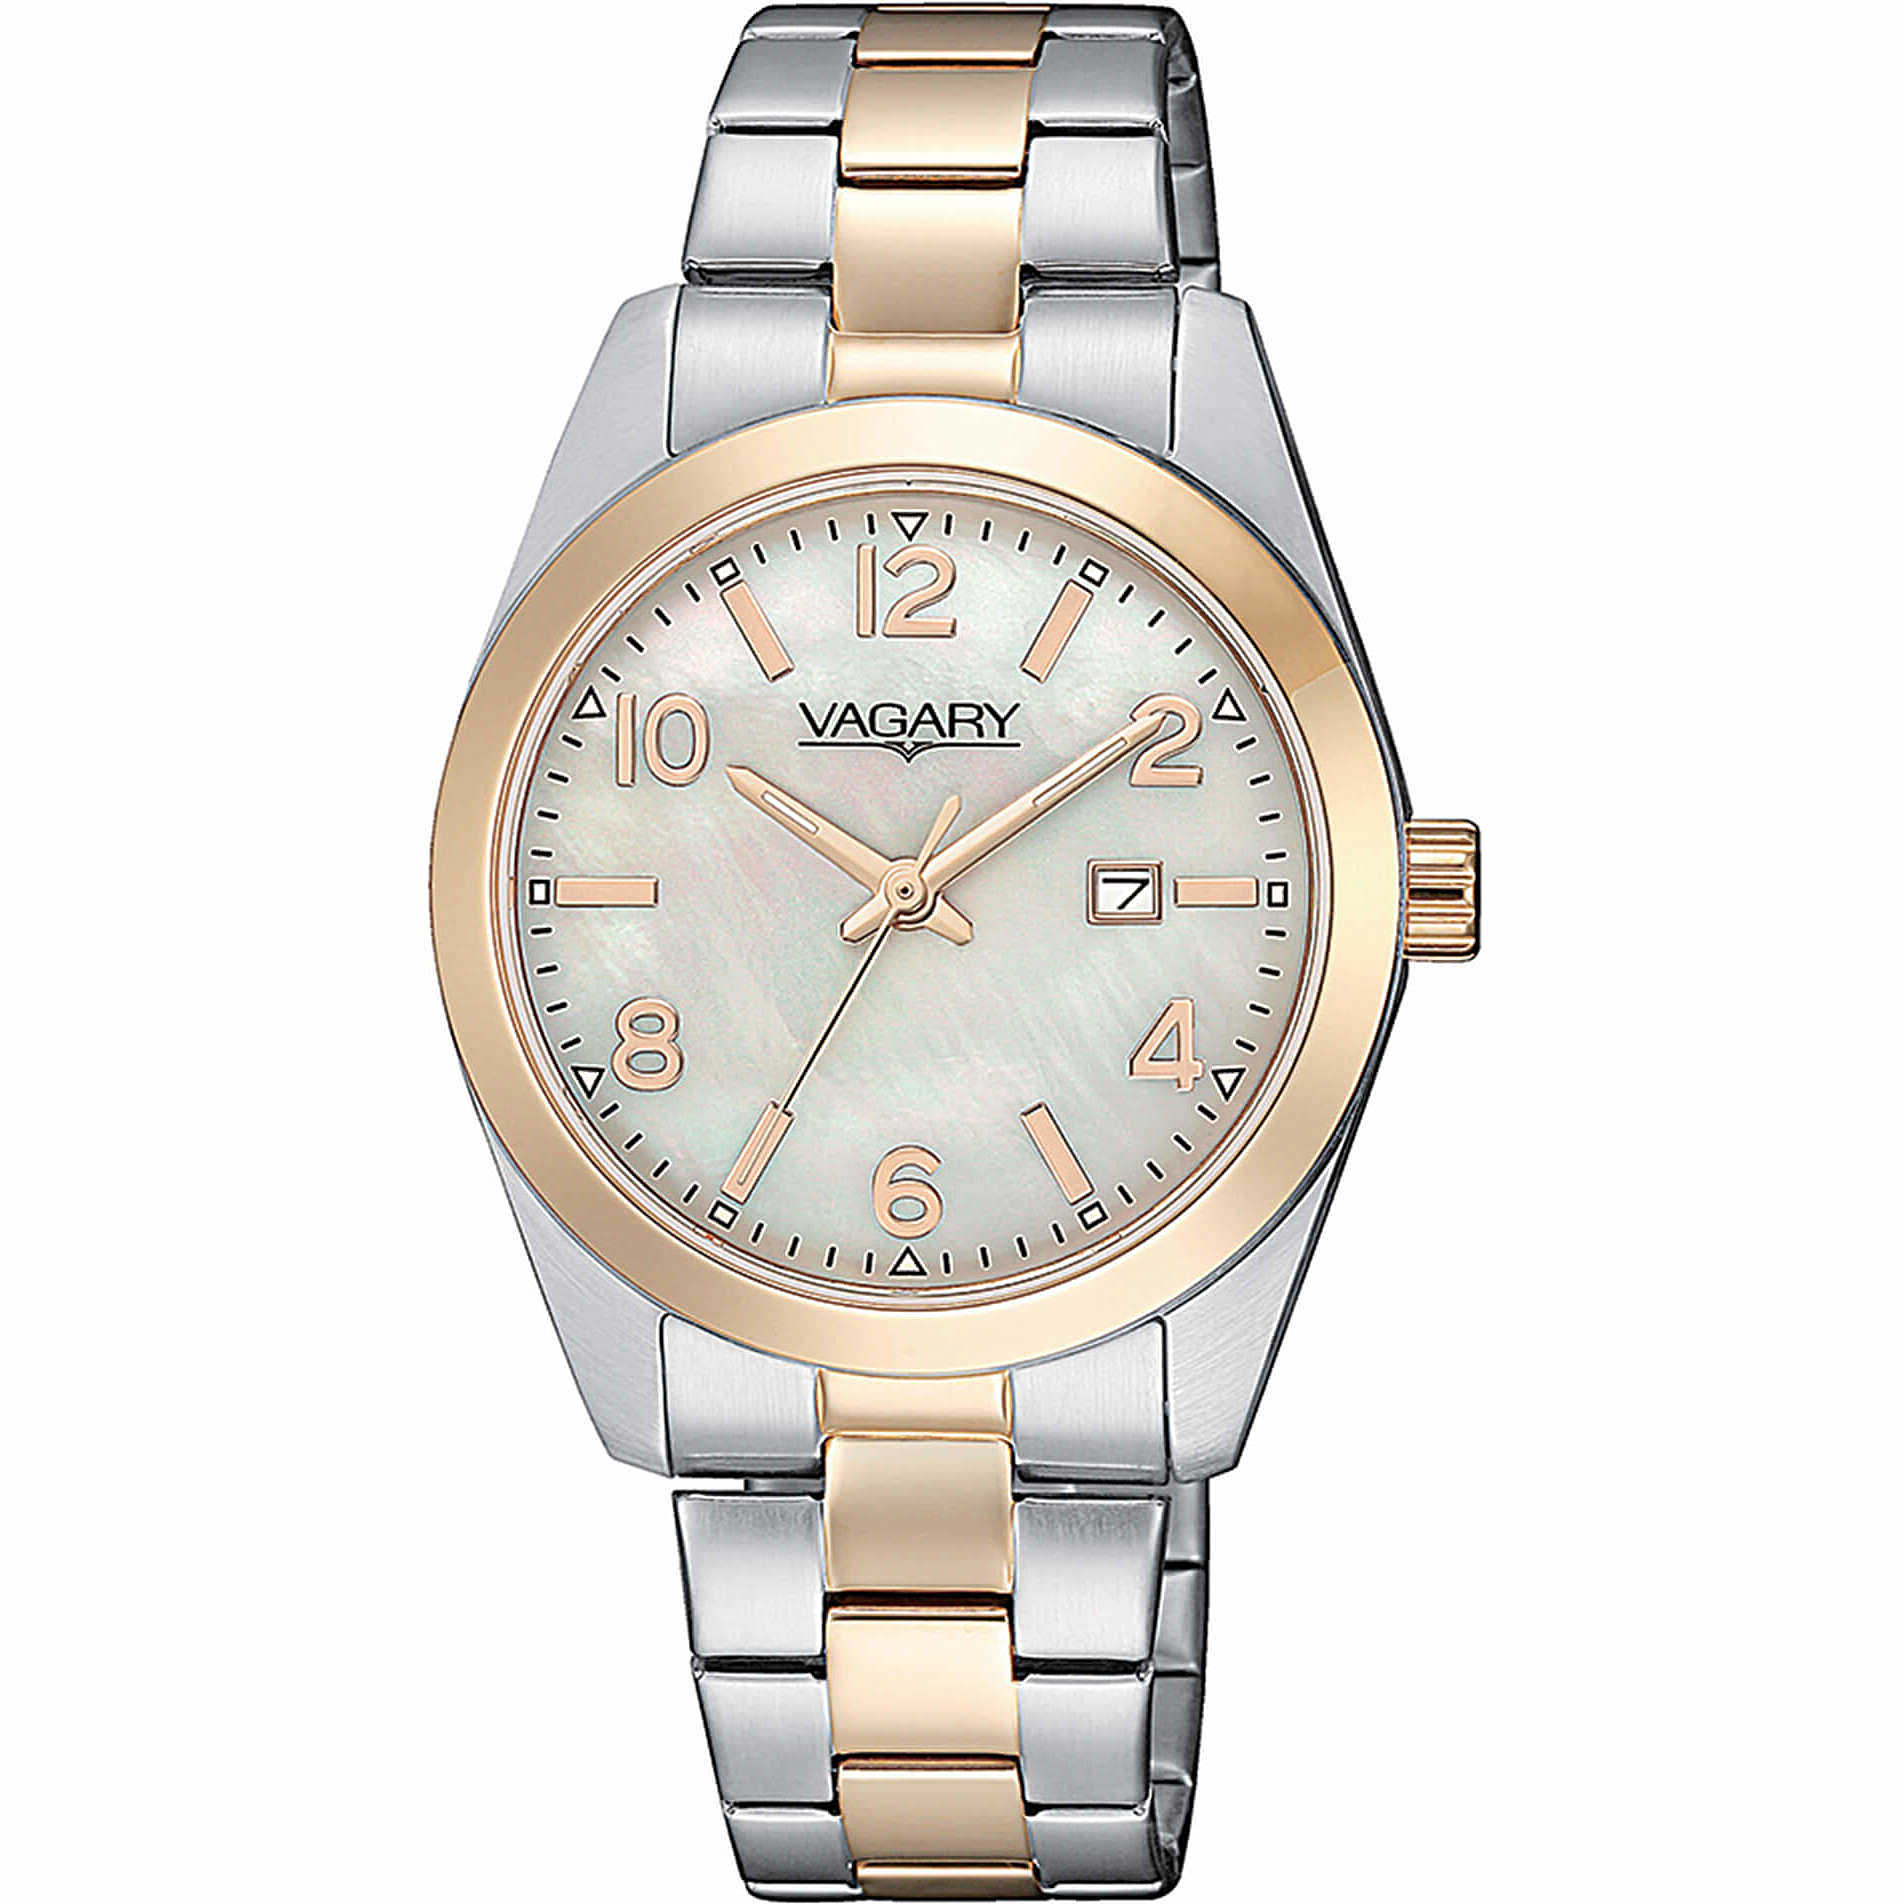 Orologio Vagary by Citizen Timeless Lady IU2-731-11